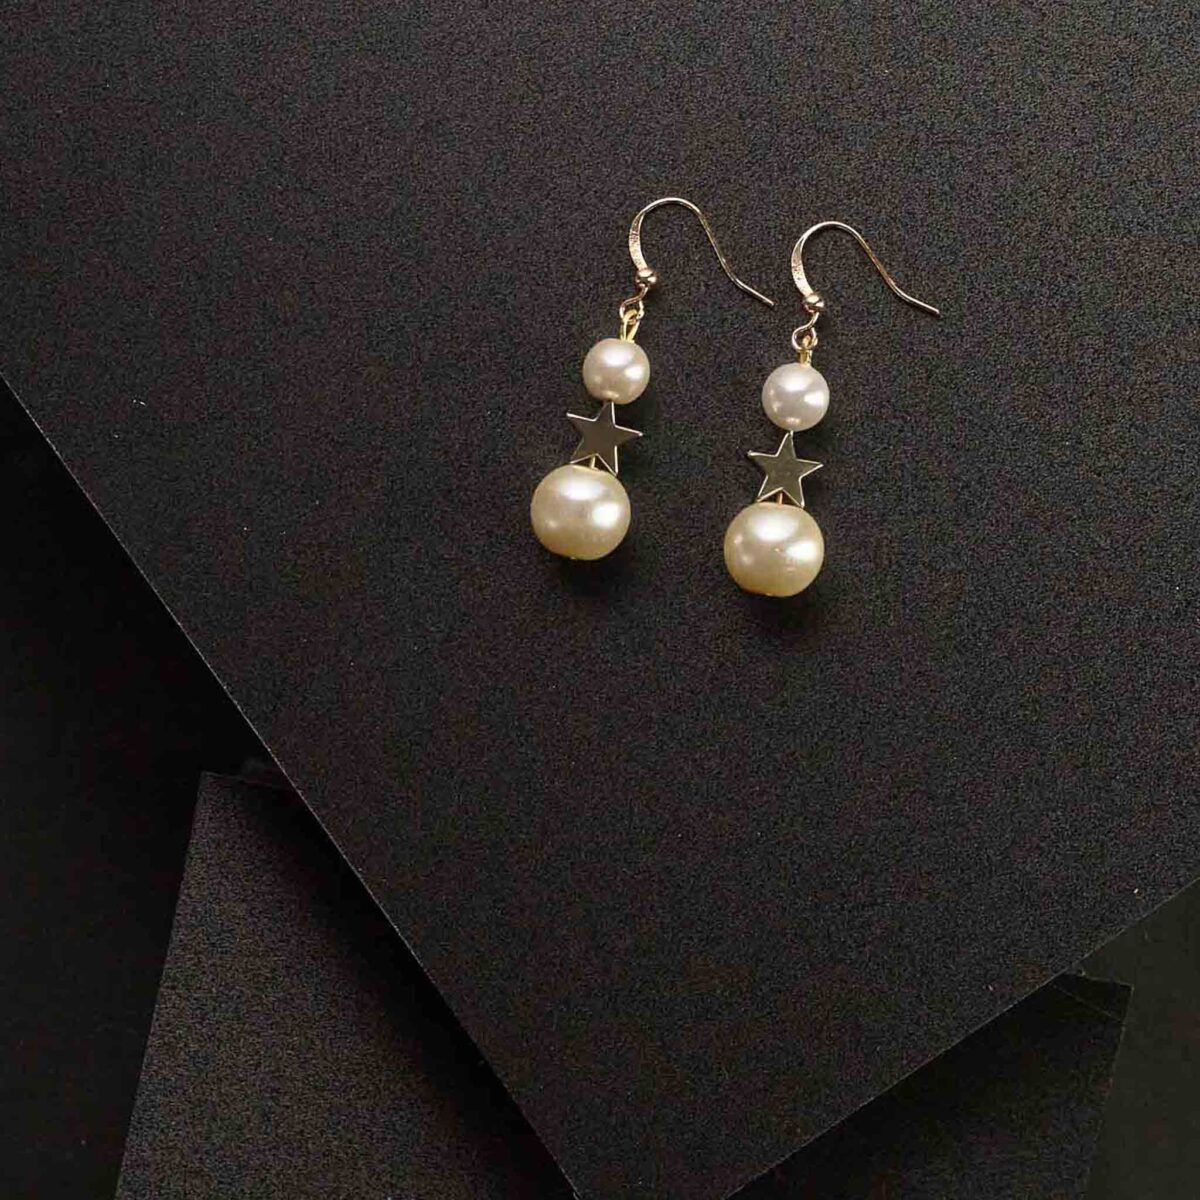 Earrings With Double Pearl and Star